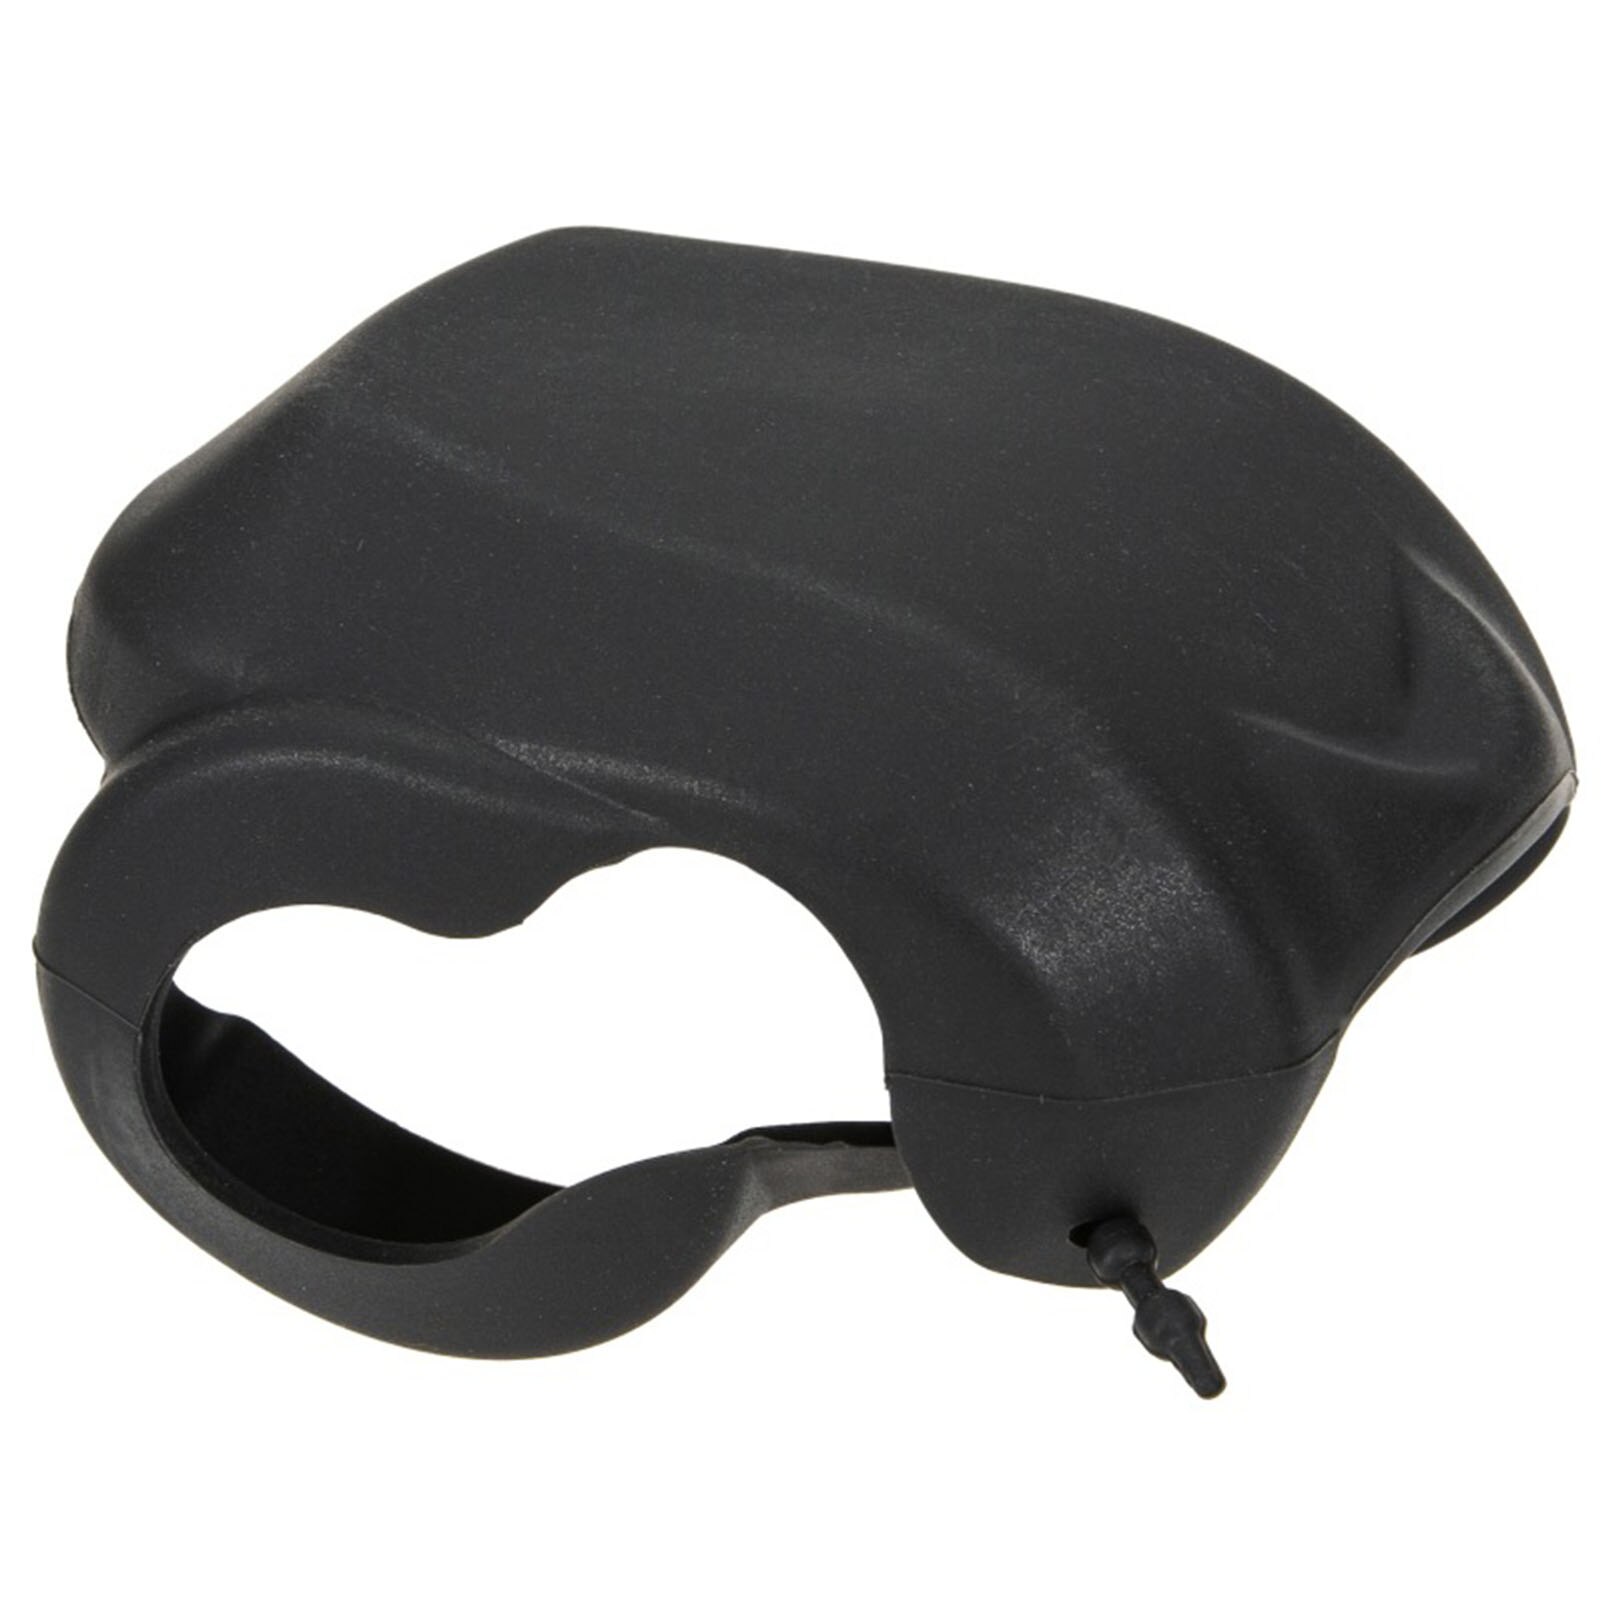 Silicone Spinning Reel Cover Fishing Spinning Reel Protector Waterproof Fishing Protective Bag Case Pouch Cover For